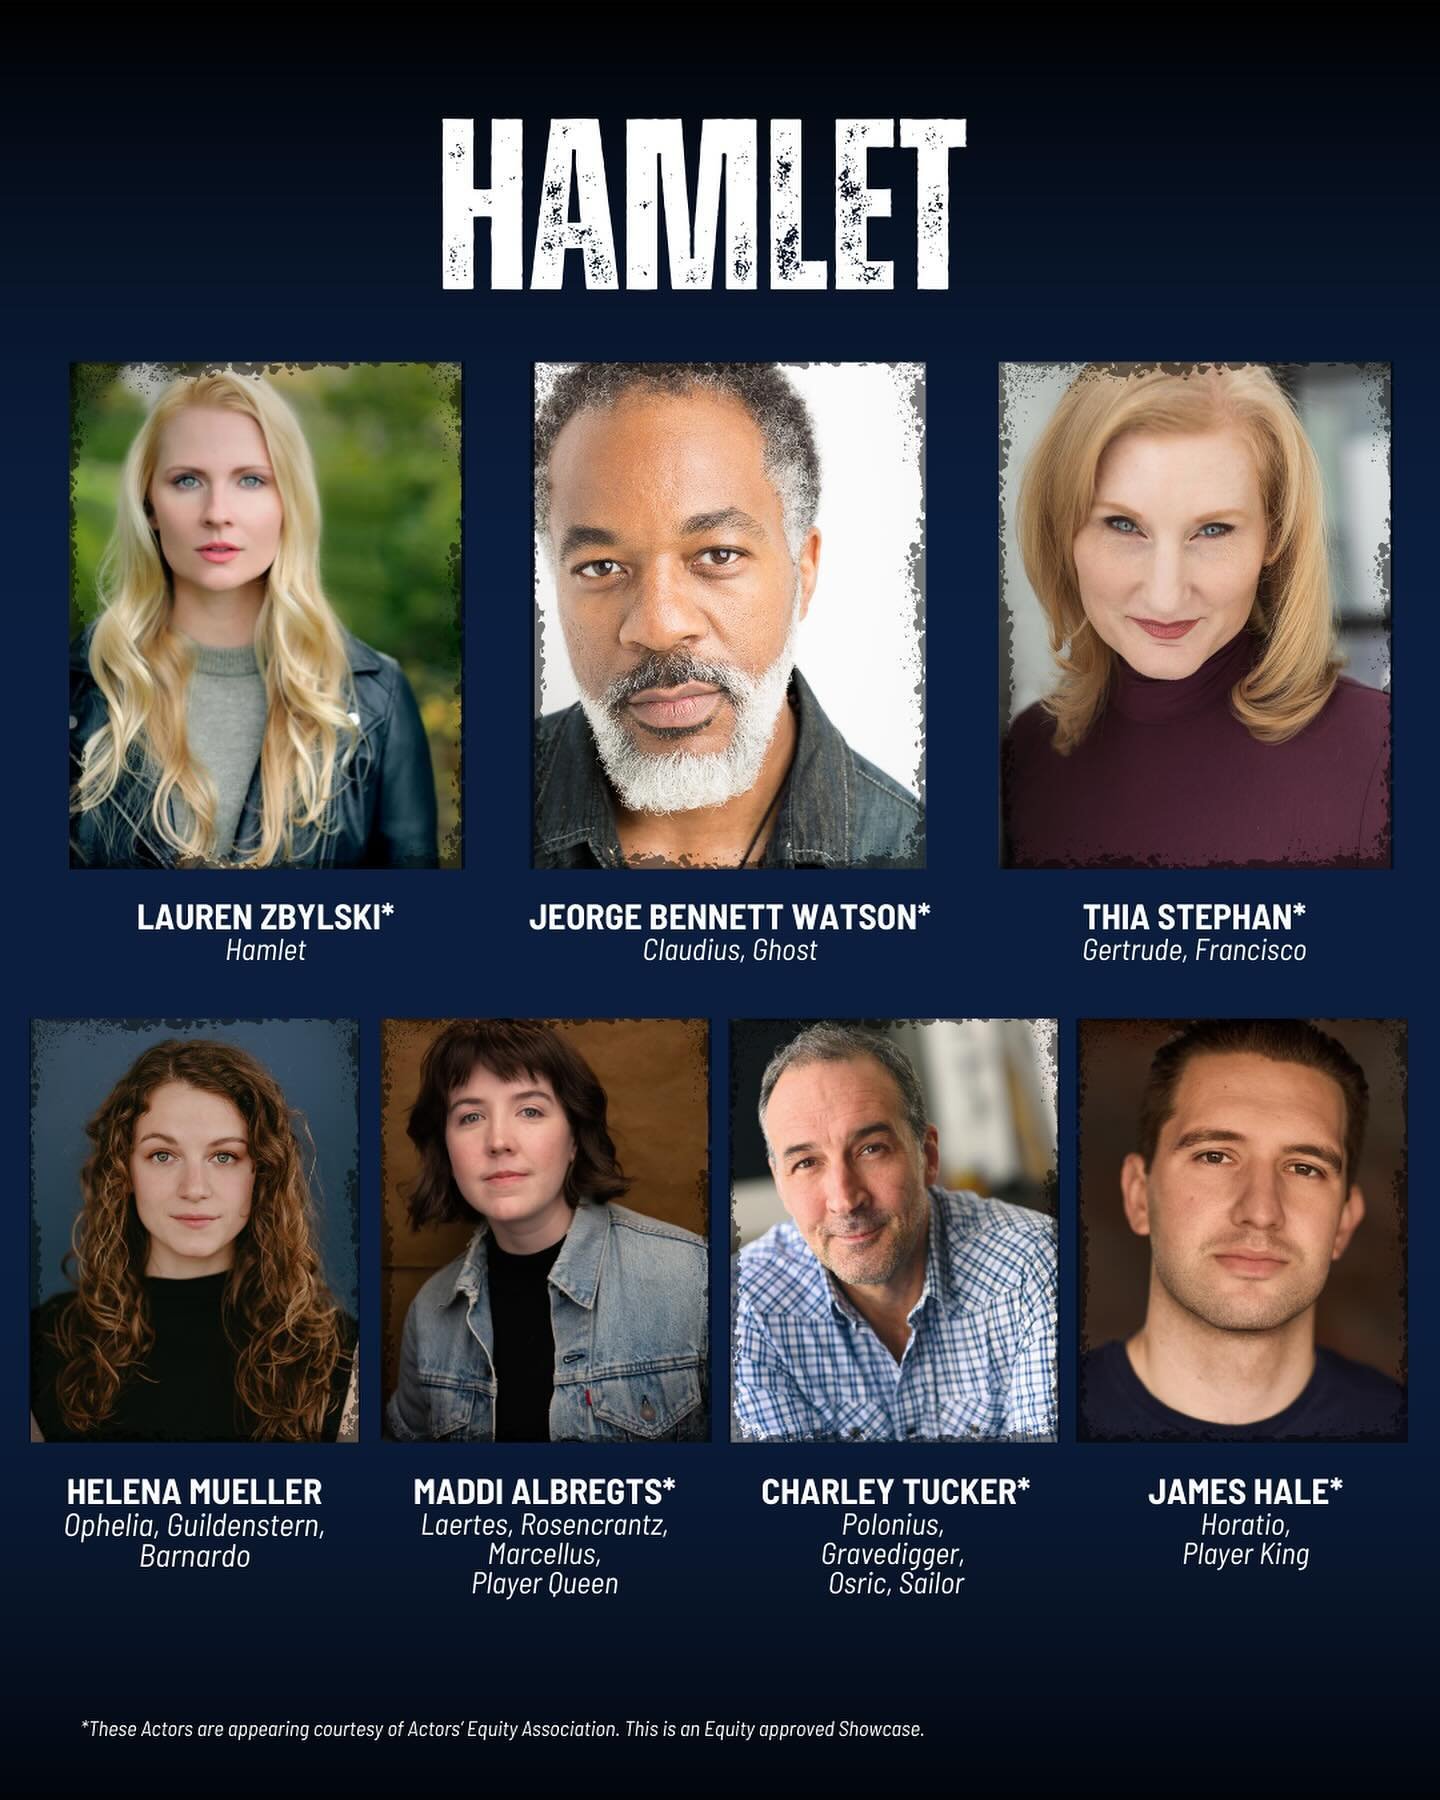 Introducing the incredible cast of MAD Company&rsquo;s &ldquo;Hamlet&rdquo;!

Come bear witness to Shakespeare&rsquo;s timeless masterpiece, running this spring at Theatre Row from May 30th - June 15th. Directed by Dave Demke and performed by a cast 